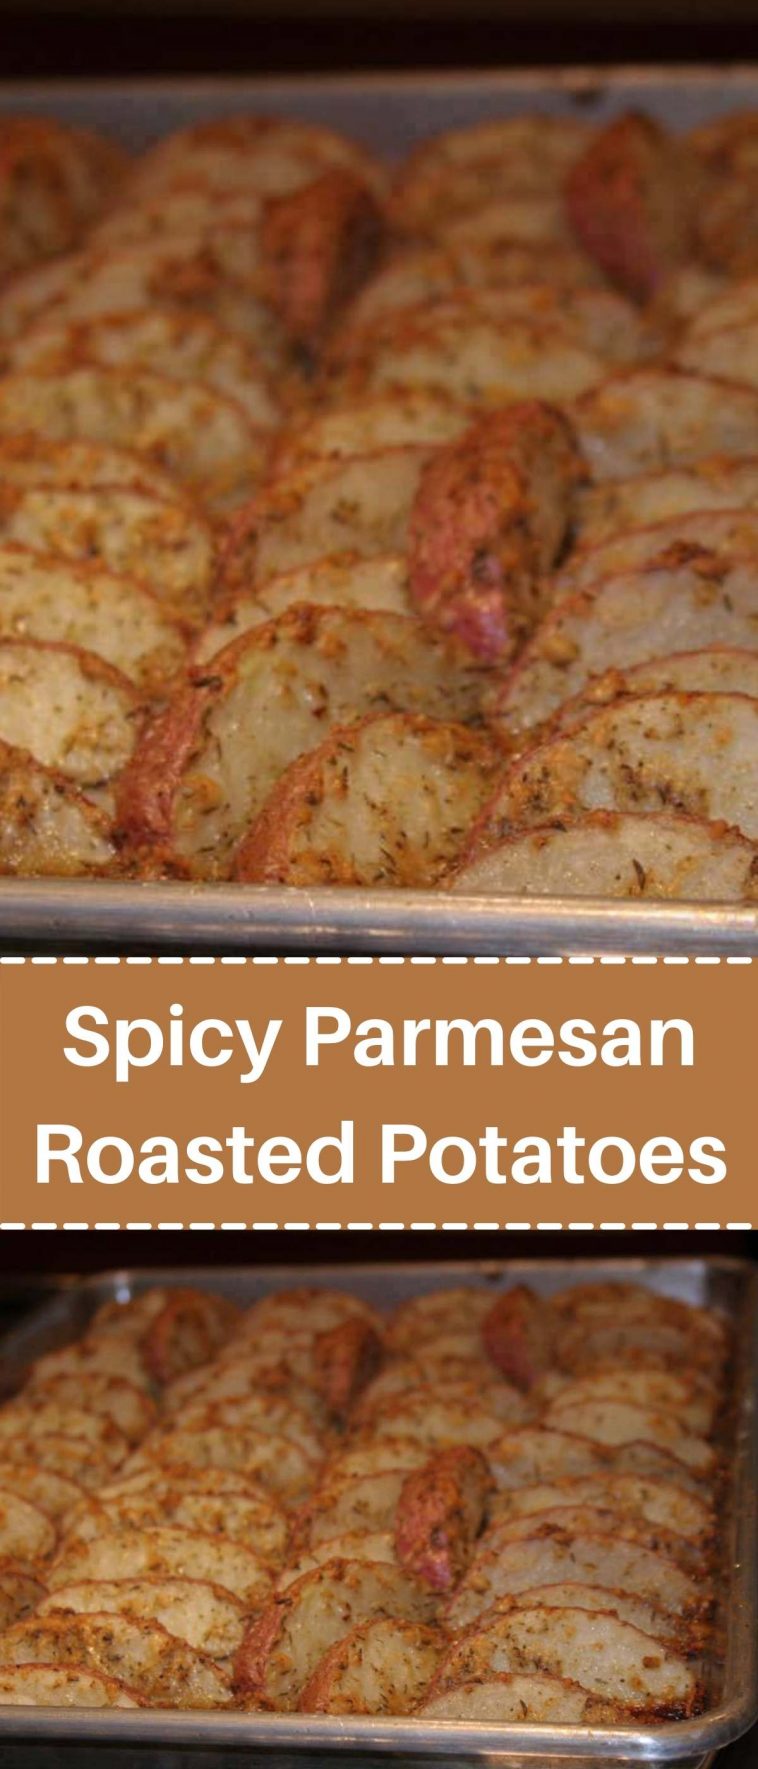 Spicy Parmesan Roasted Potatoes